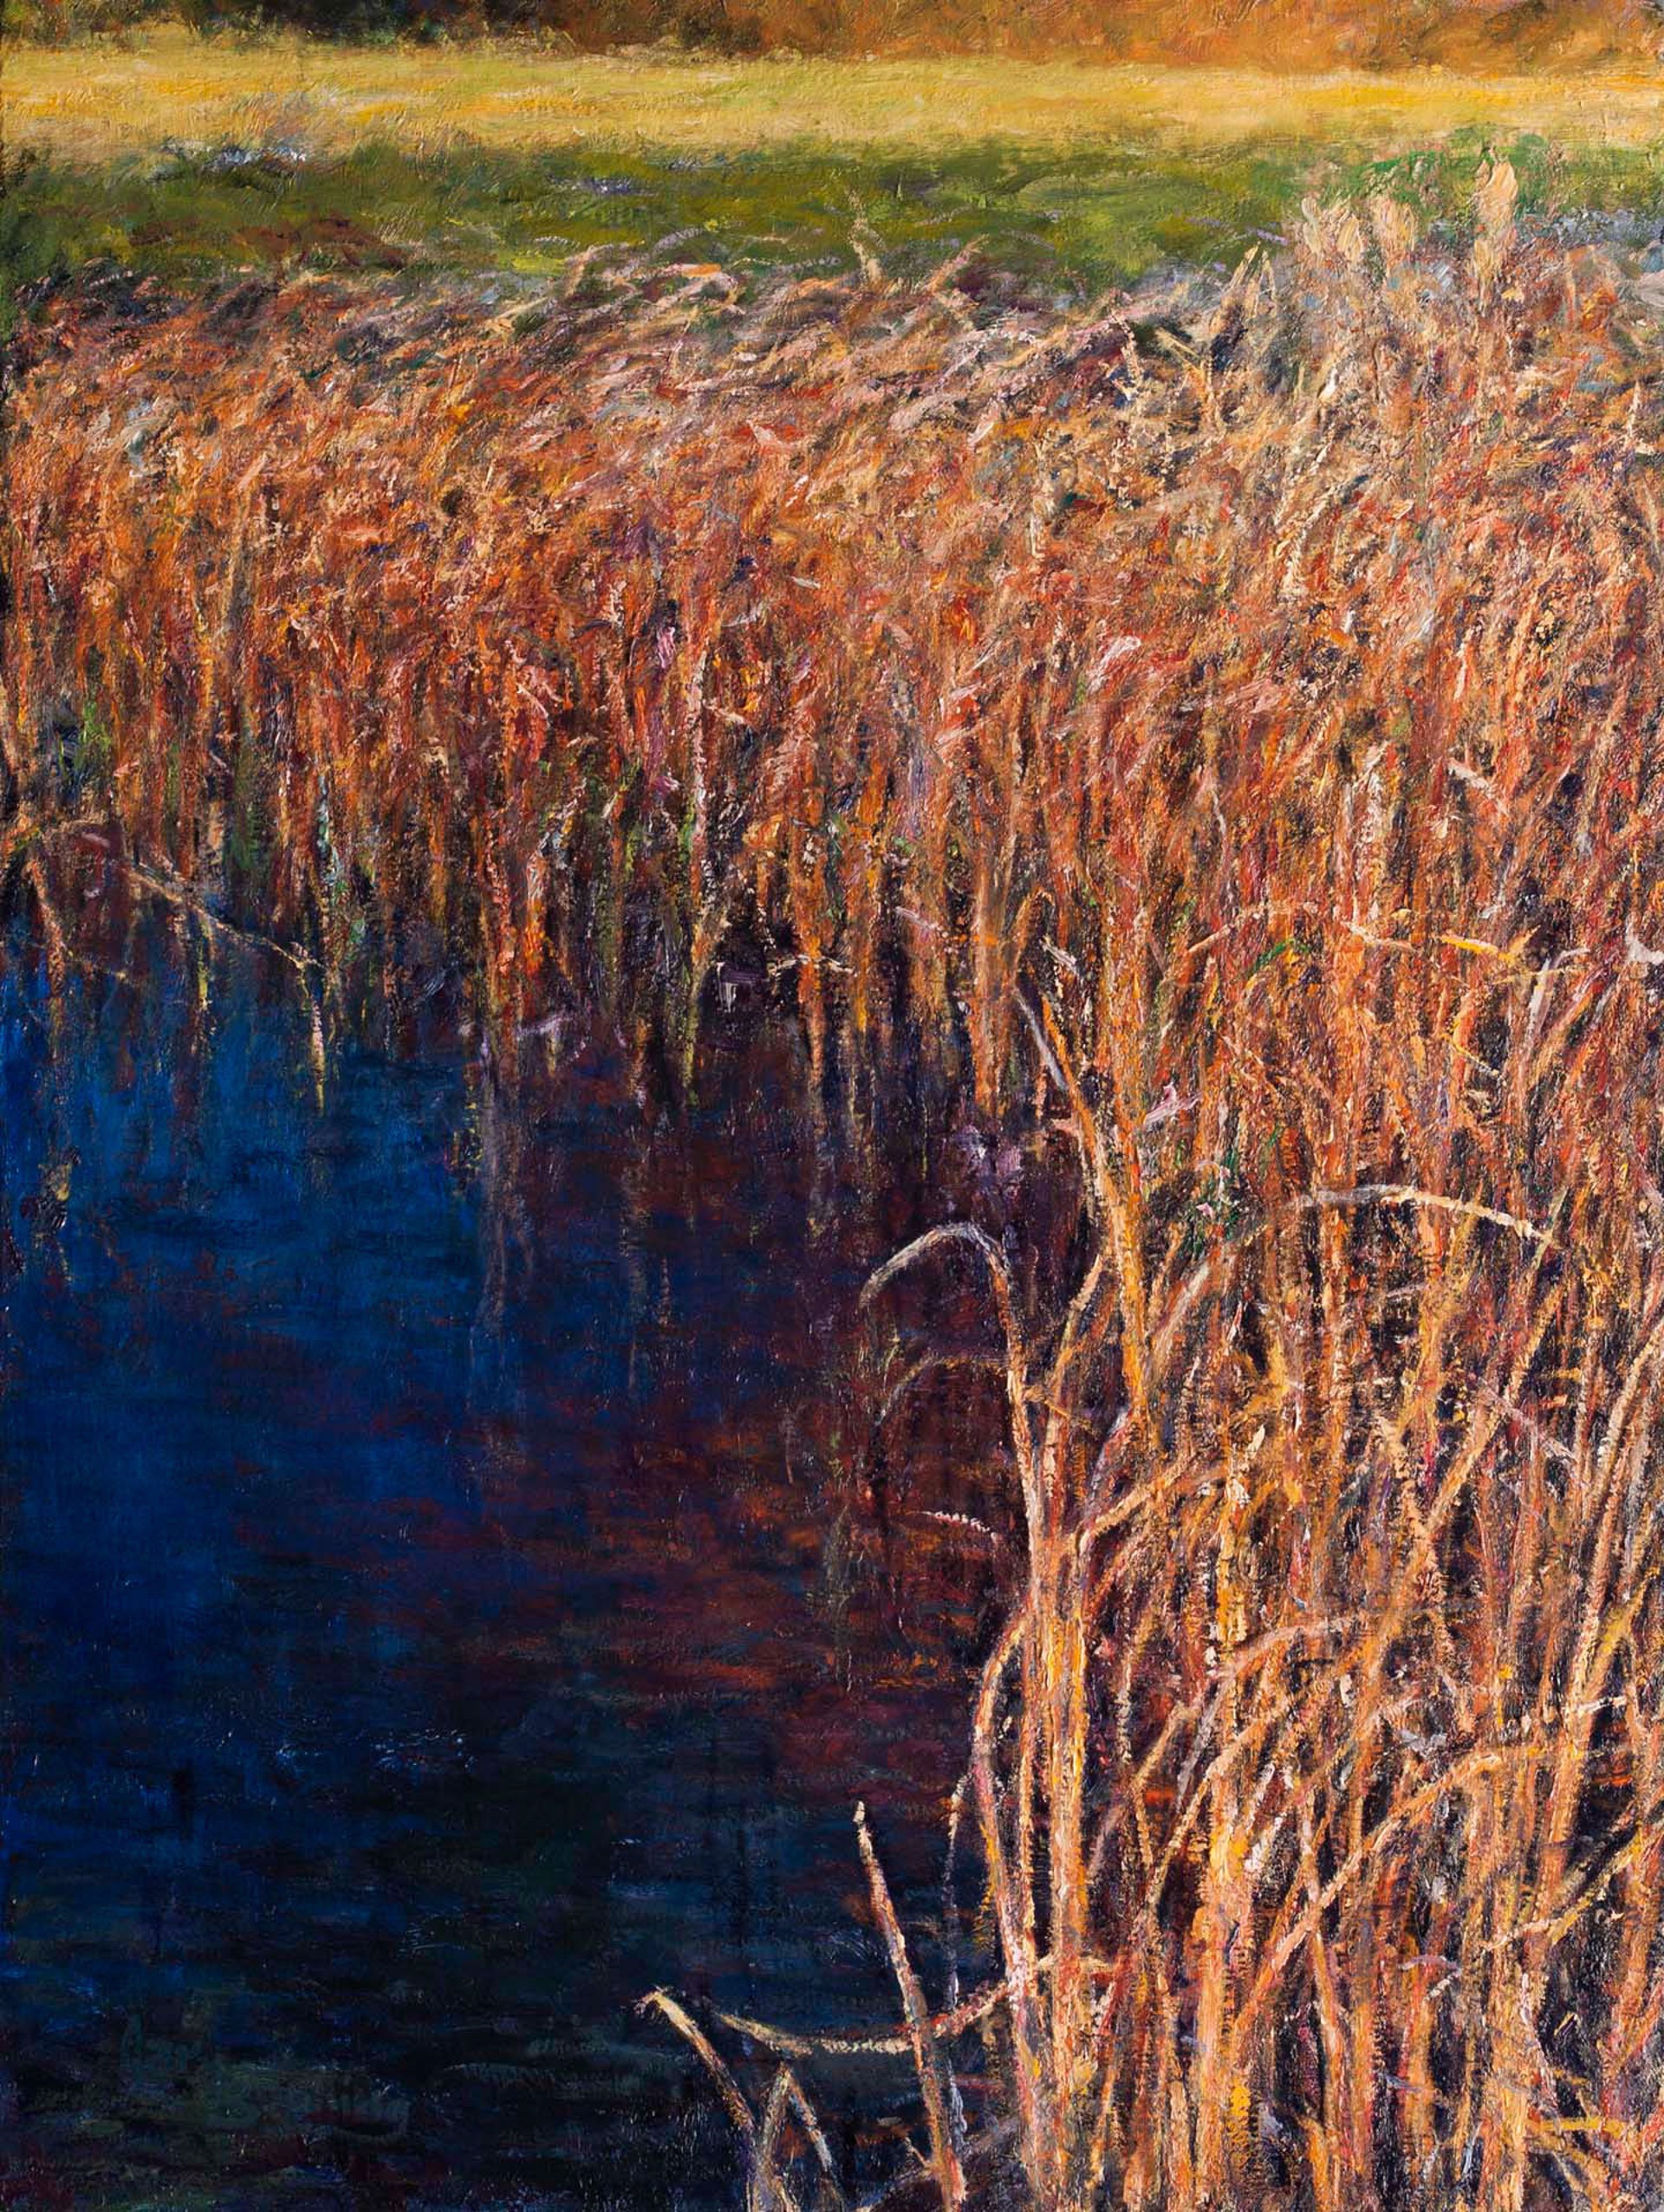 Dry Reeds Temper Cold Water by Gary Bowling